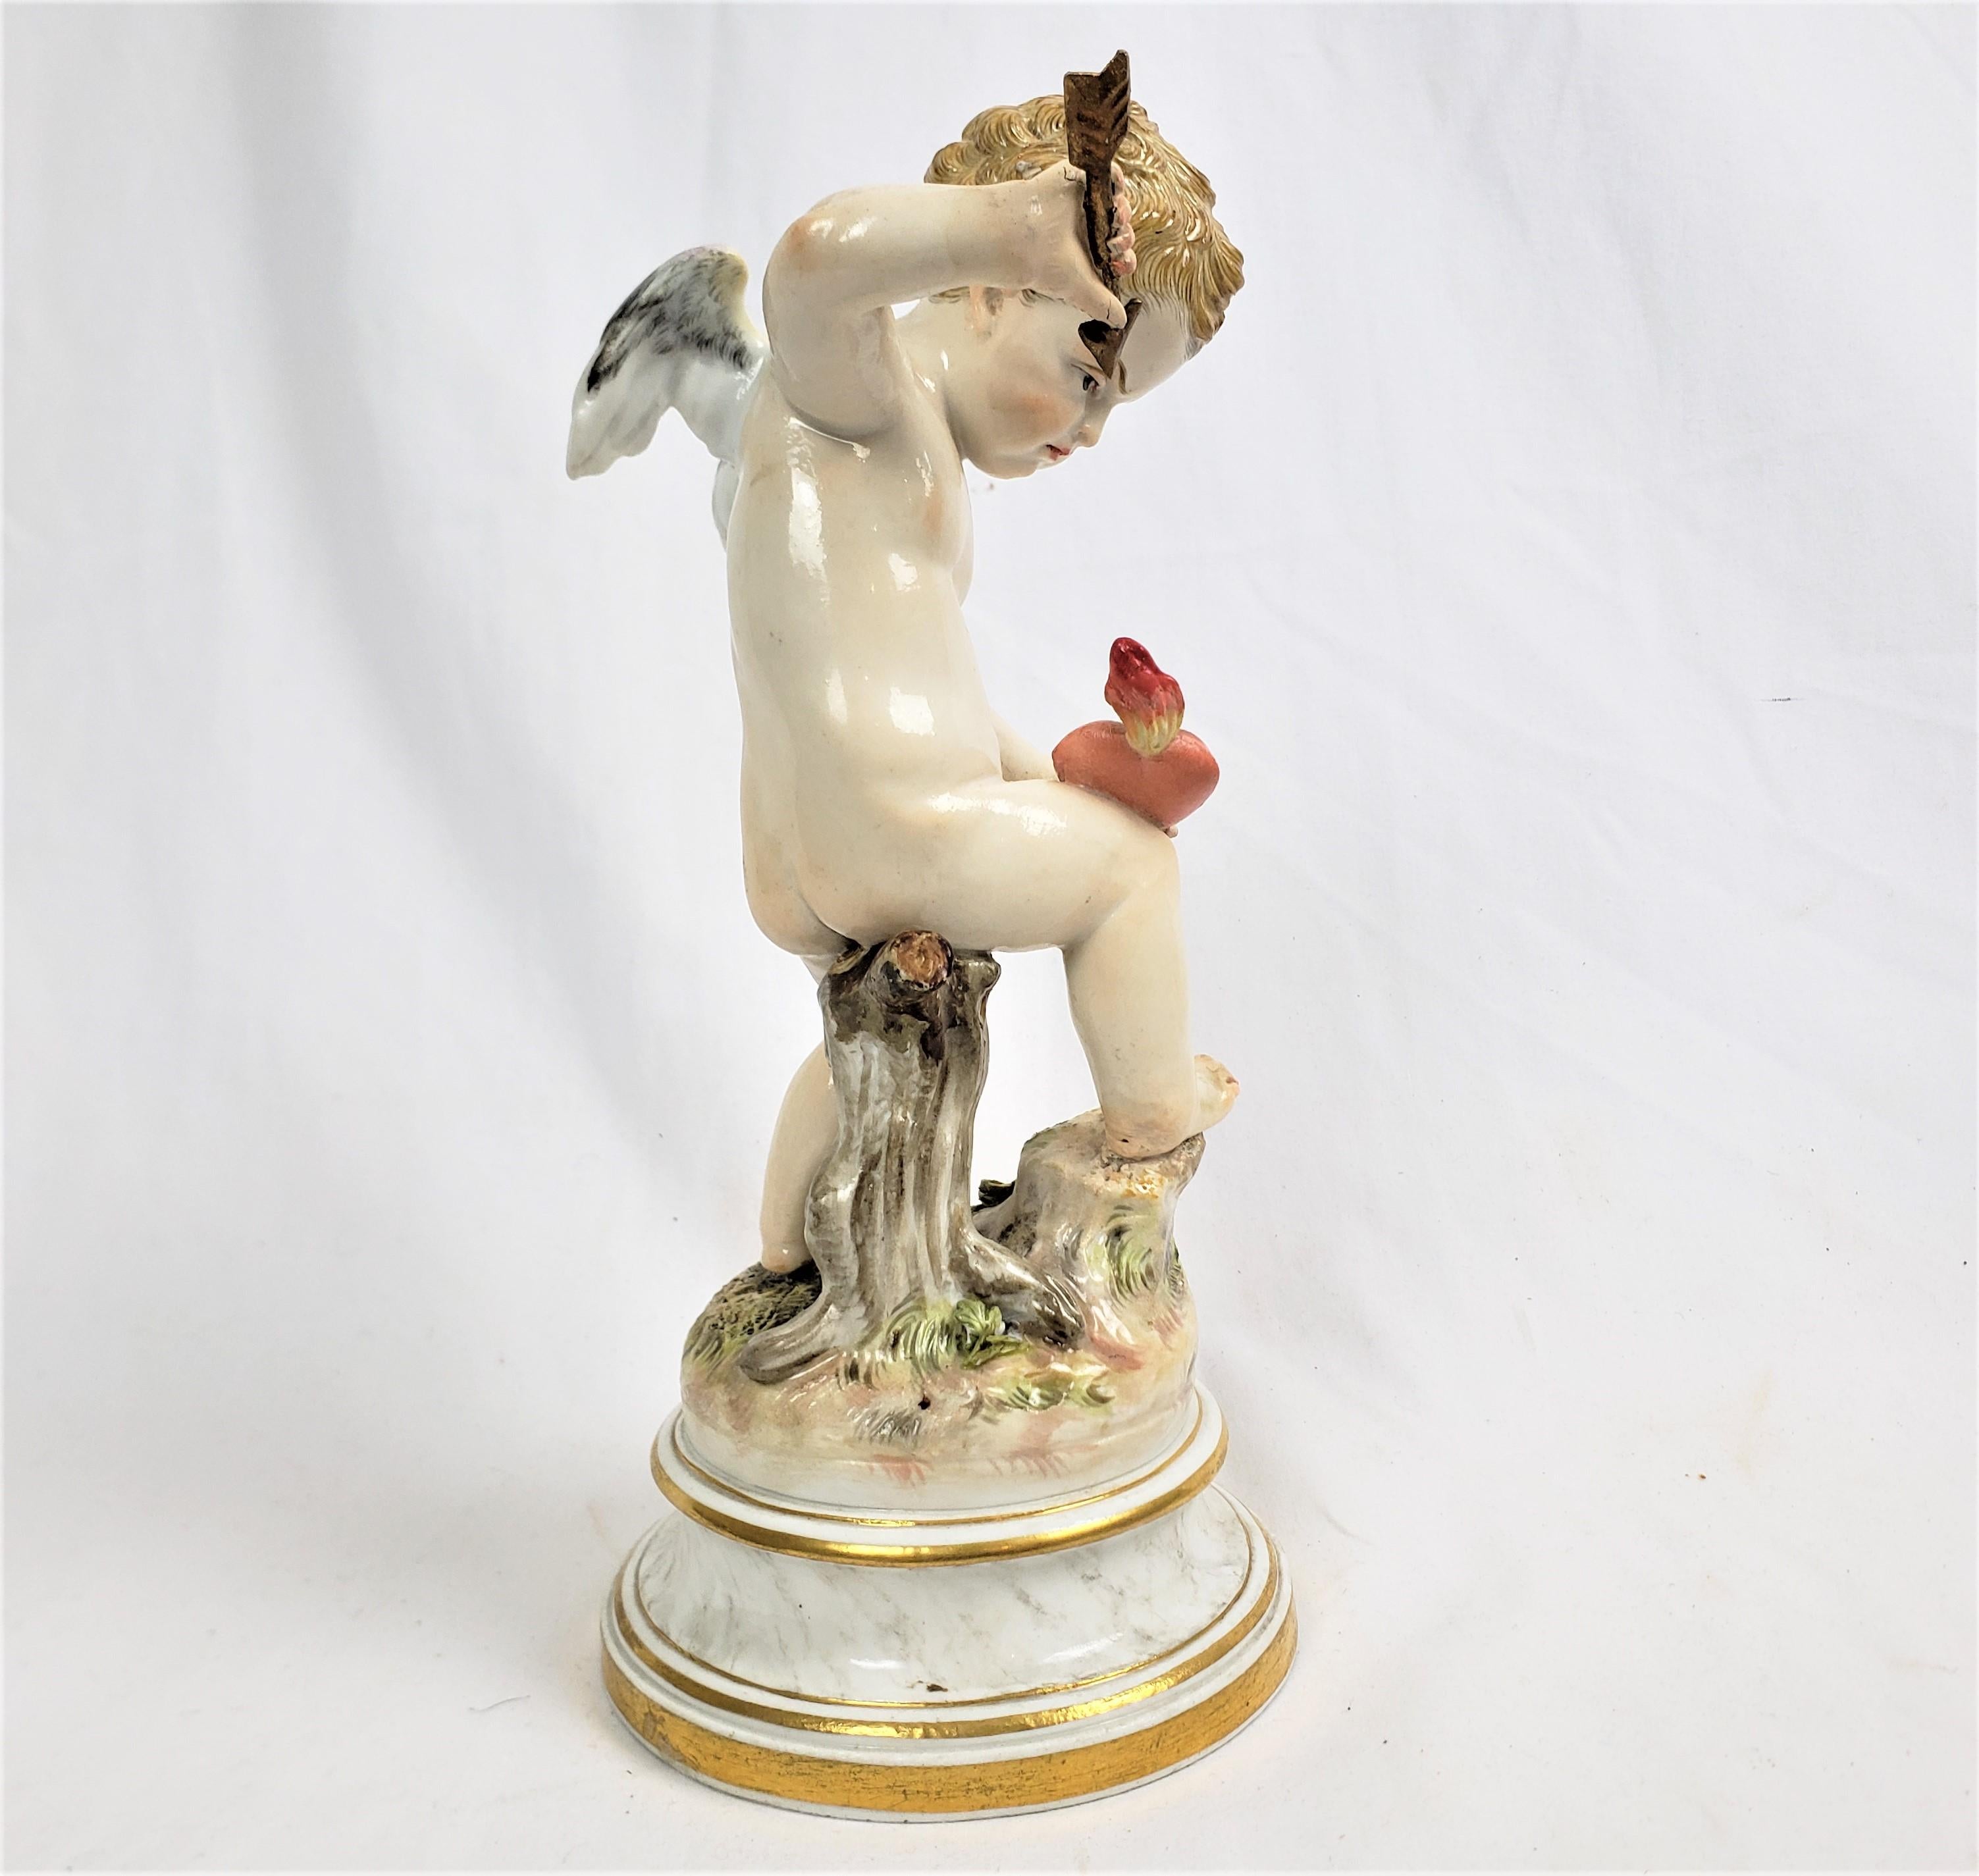 German Antique Meissen Porcelain Figurine of Cupid Holding an Arrow & Flaming Heart For Sale